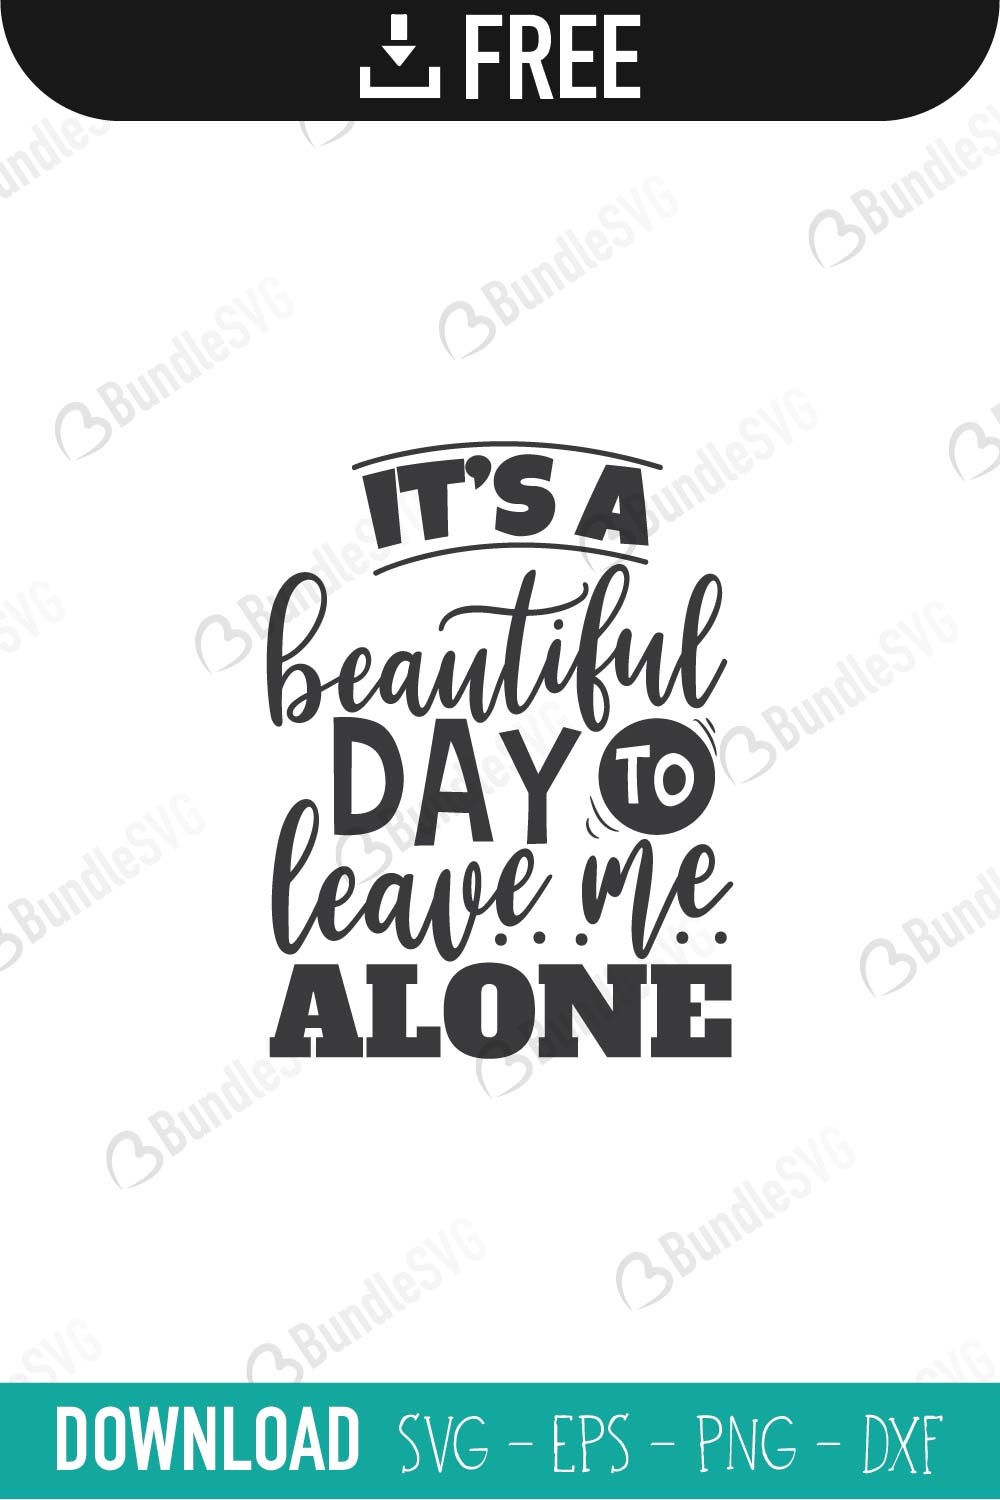 Download Antisocial Svg Downloadable Png And Svg Cut File Funny Svg Introvert Svg It S A Beautiful Day To Leave Me Alone Svg Leave Me Alone Svg Home Decor Wall Decor Dekorasyonu Net